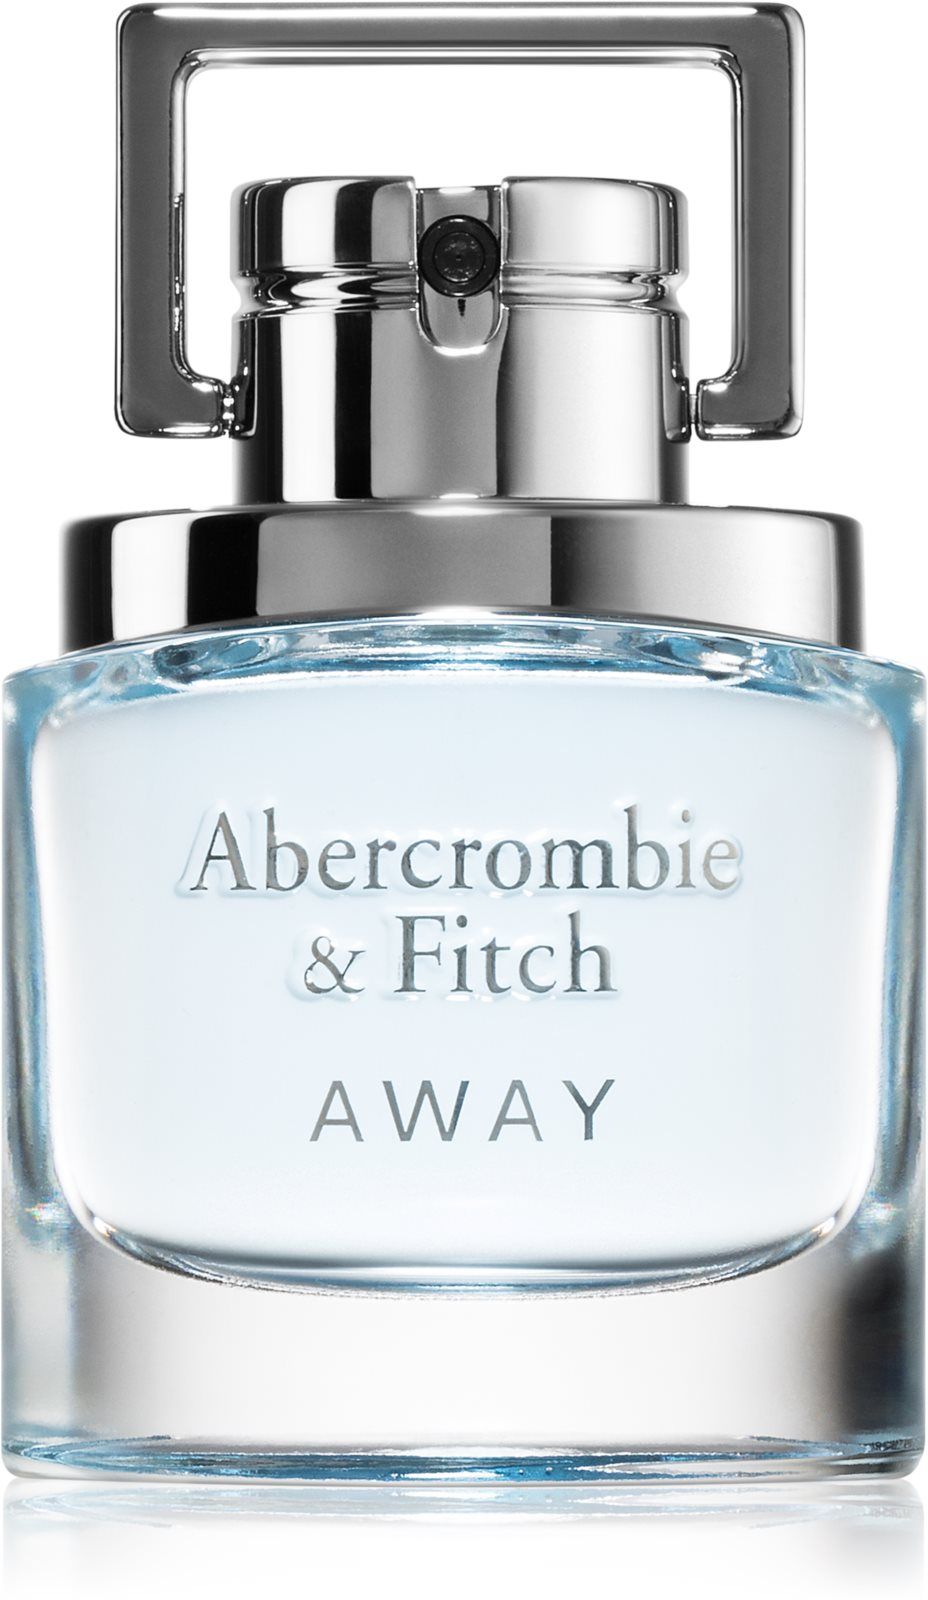 Abercrombie fitch away отзывы. Abercrombie Fitch away духи женские.